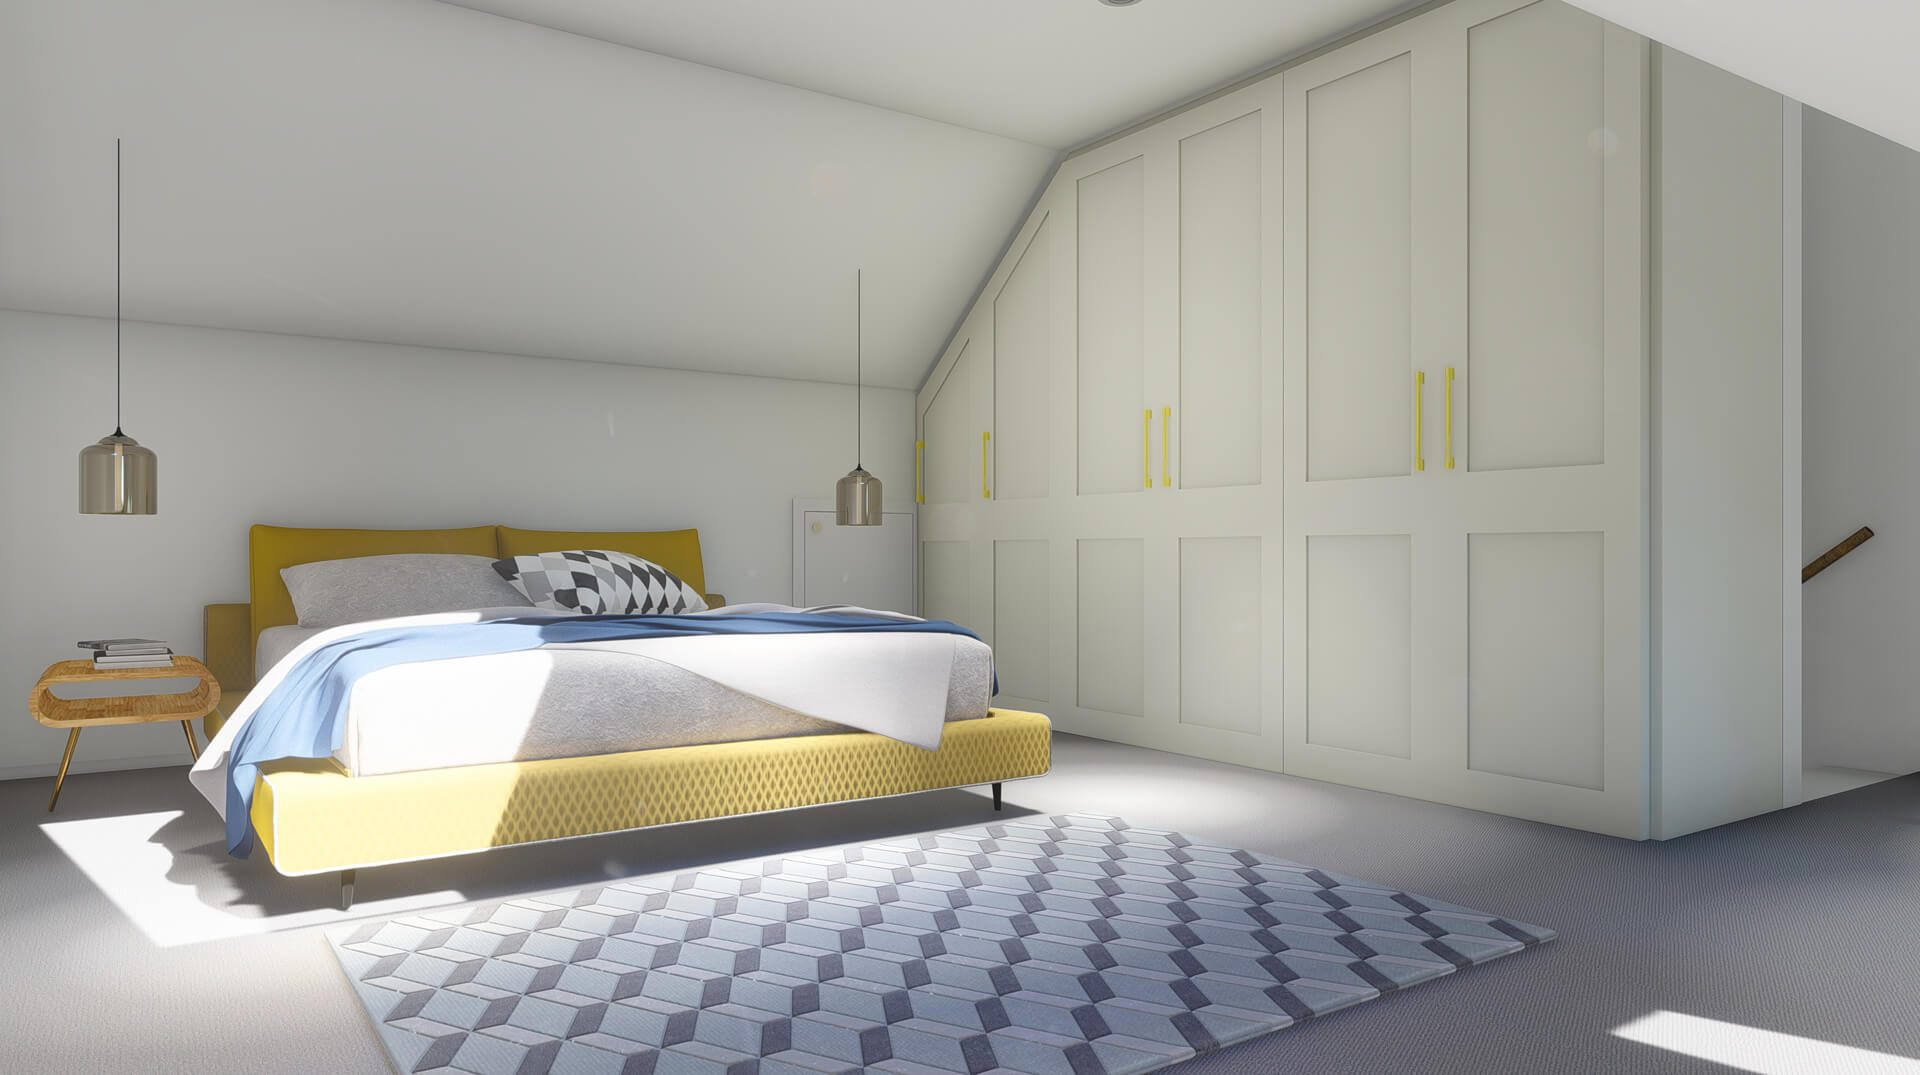 CGI of bedroom at the Hive development.